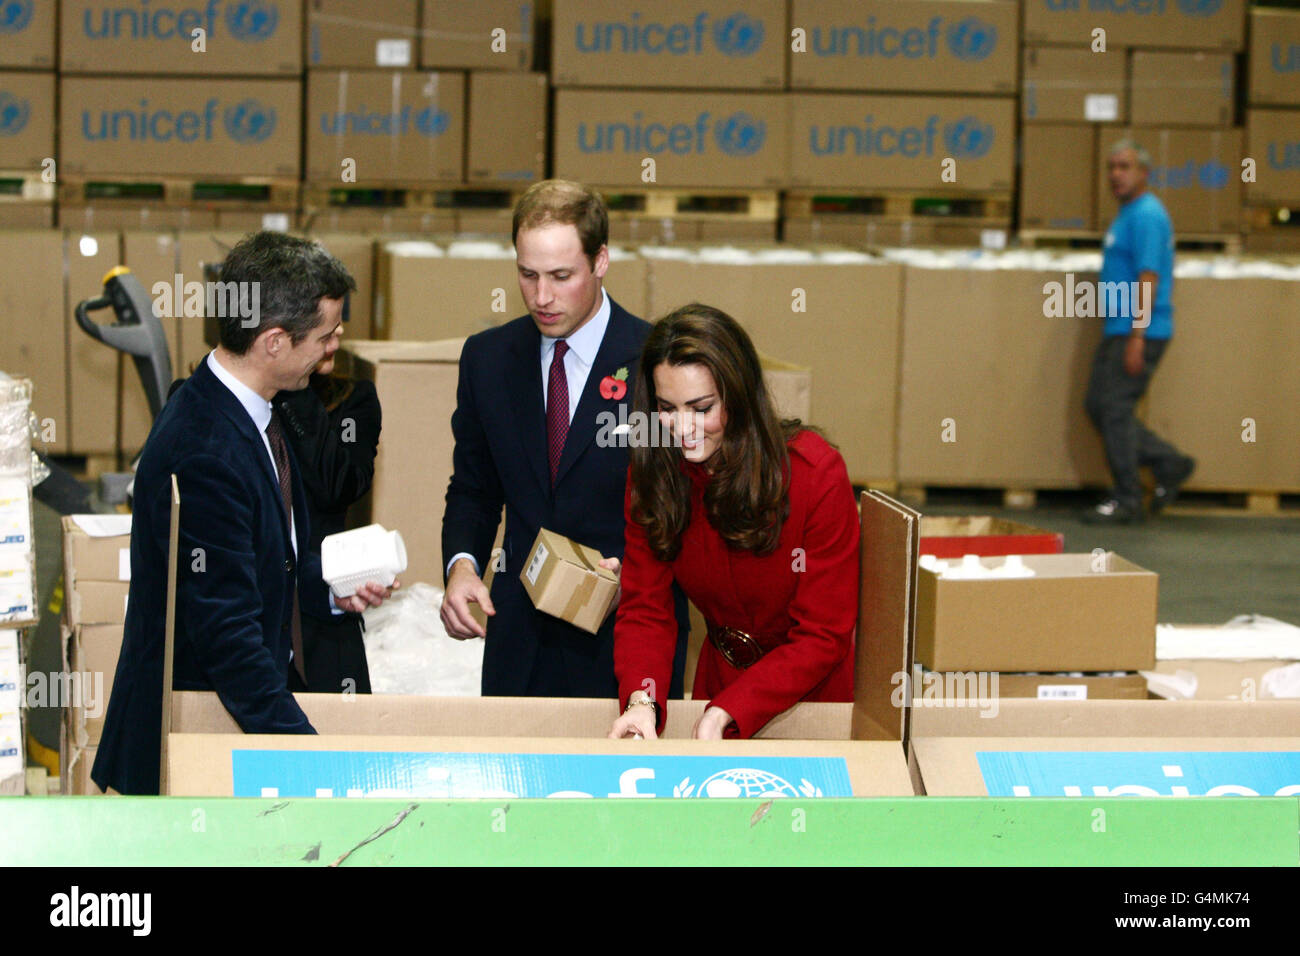 The Duke and Duchess of Cambridge during their visit to the UNICEF Supply Division Centre , as they take part in their first joint humanitarian mission. Stock Photo